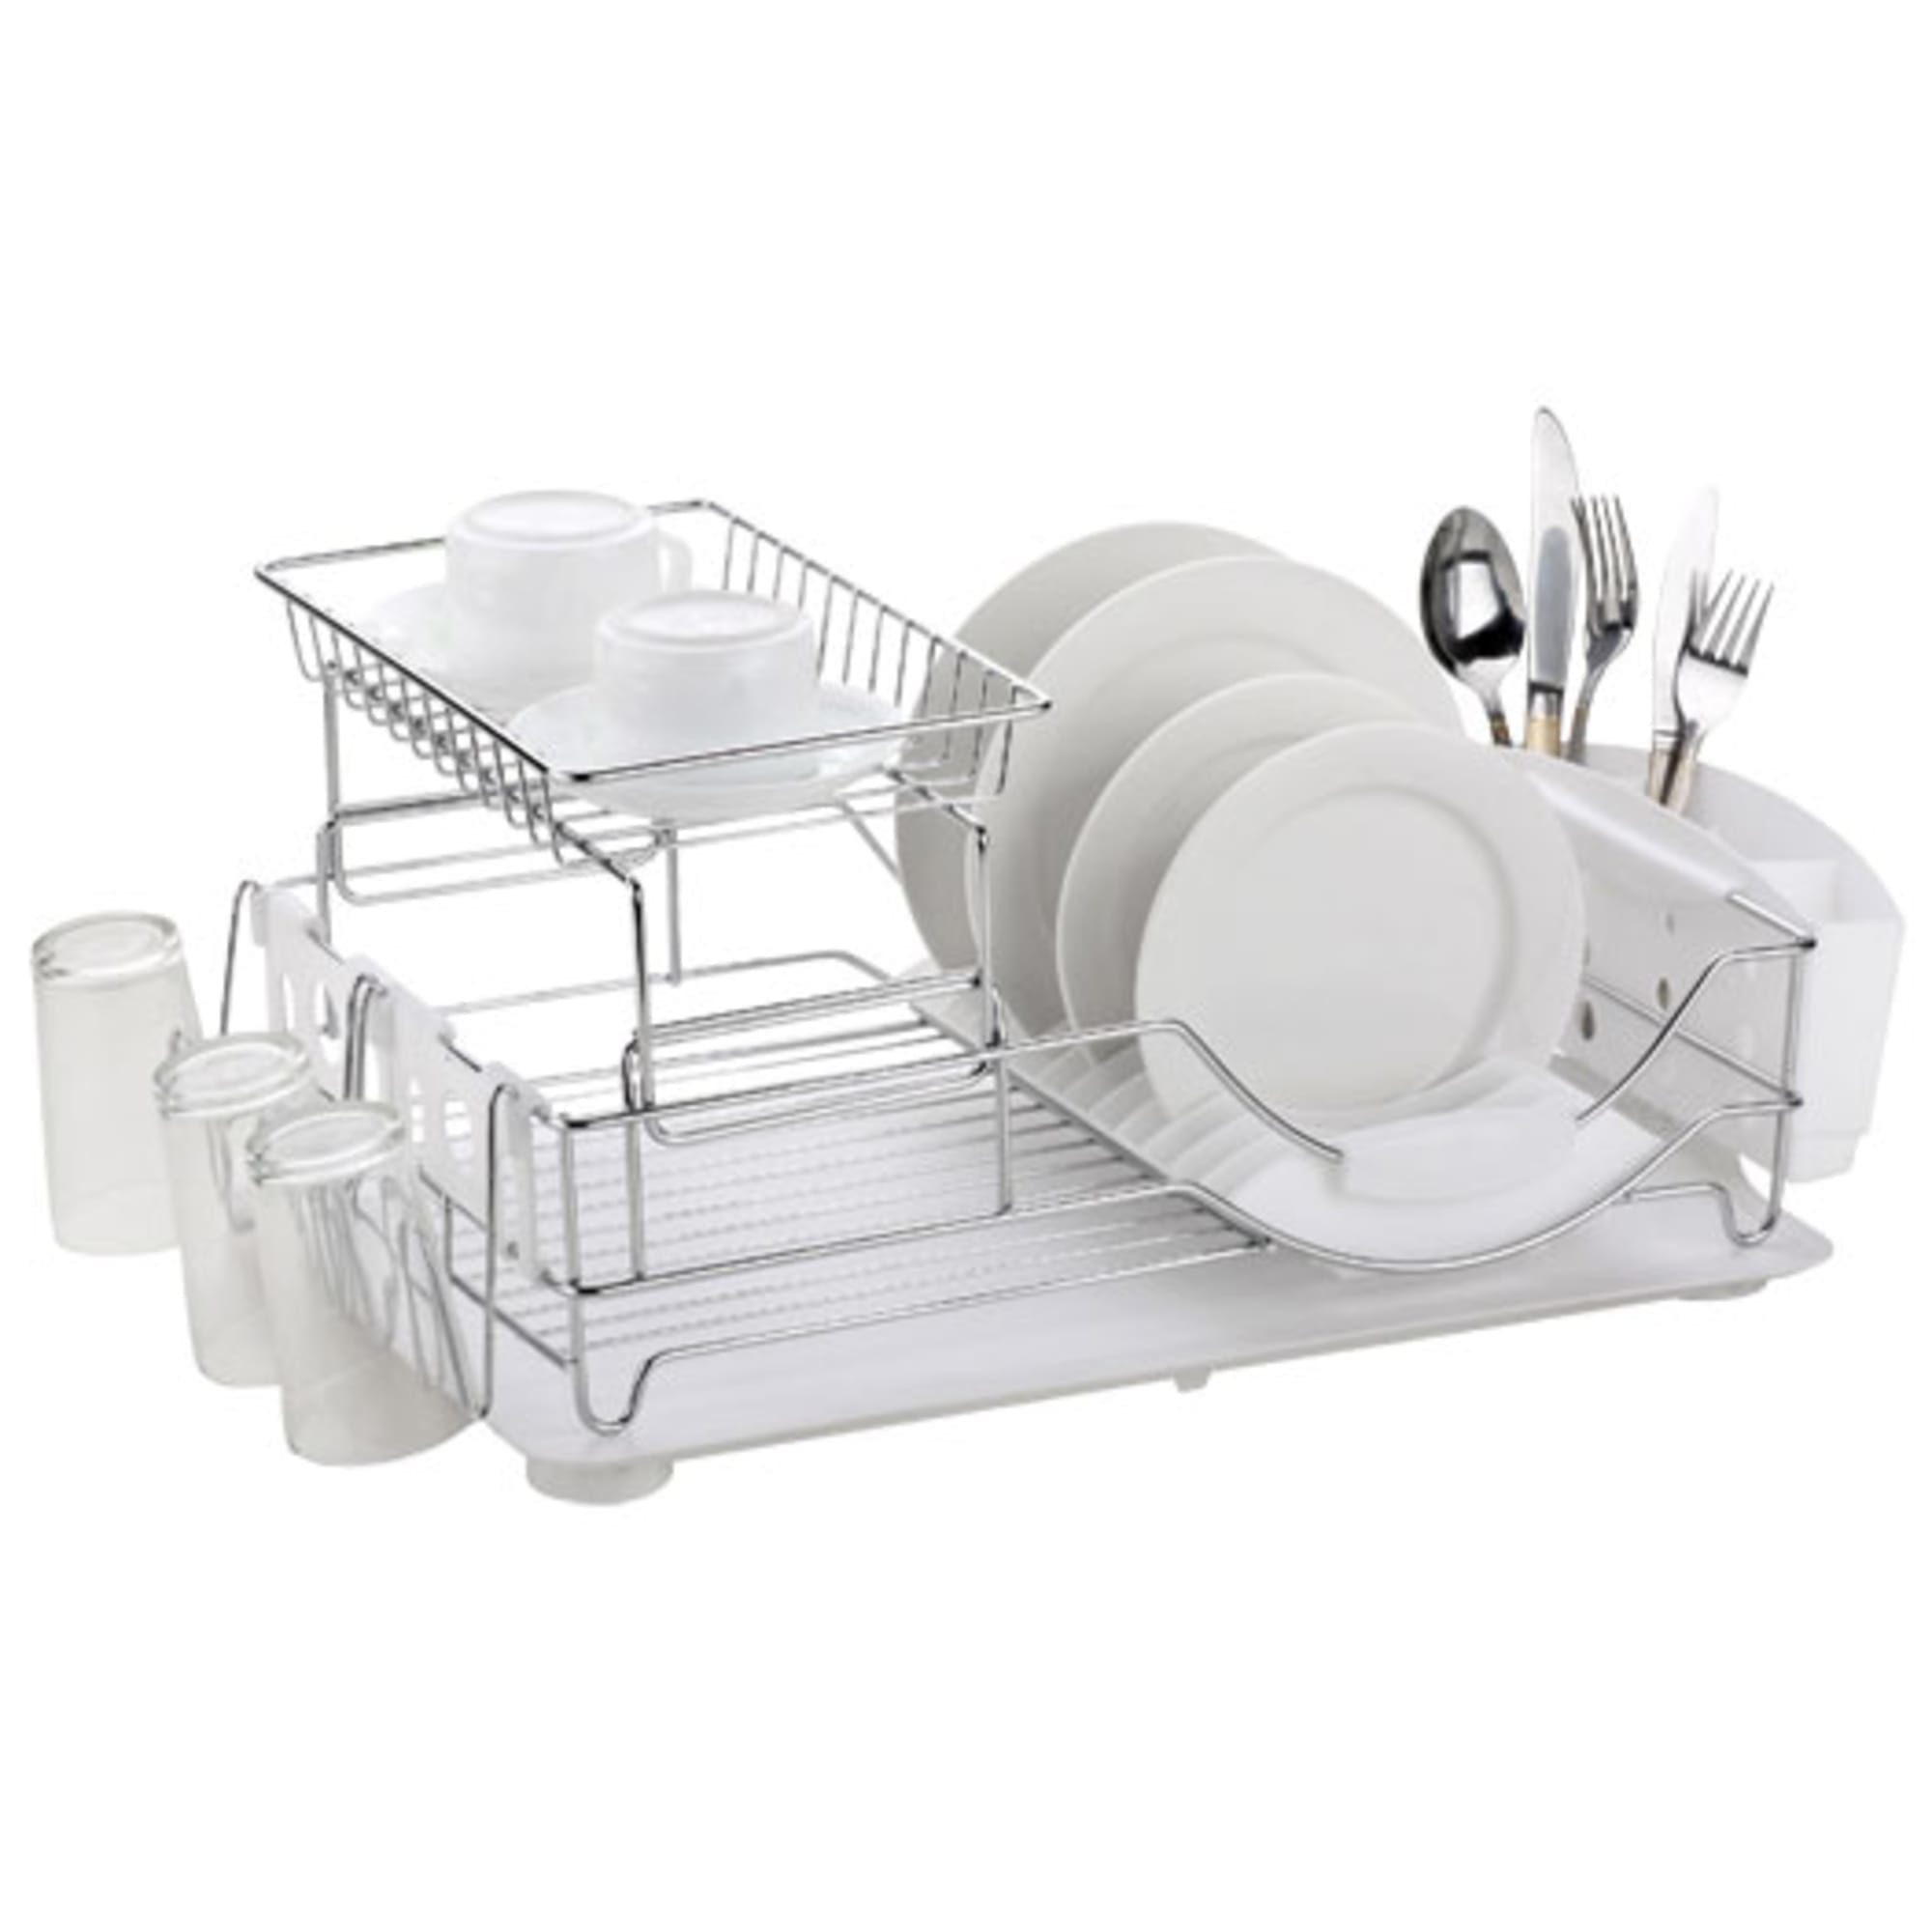 The Kitchen Sense Chrome 2 Tier Deluxe Dish Drying Rack with Drain Tray 